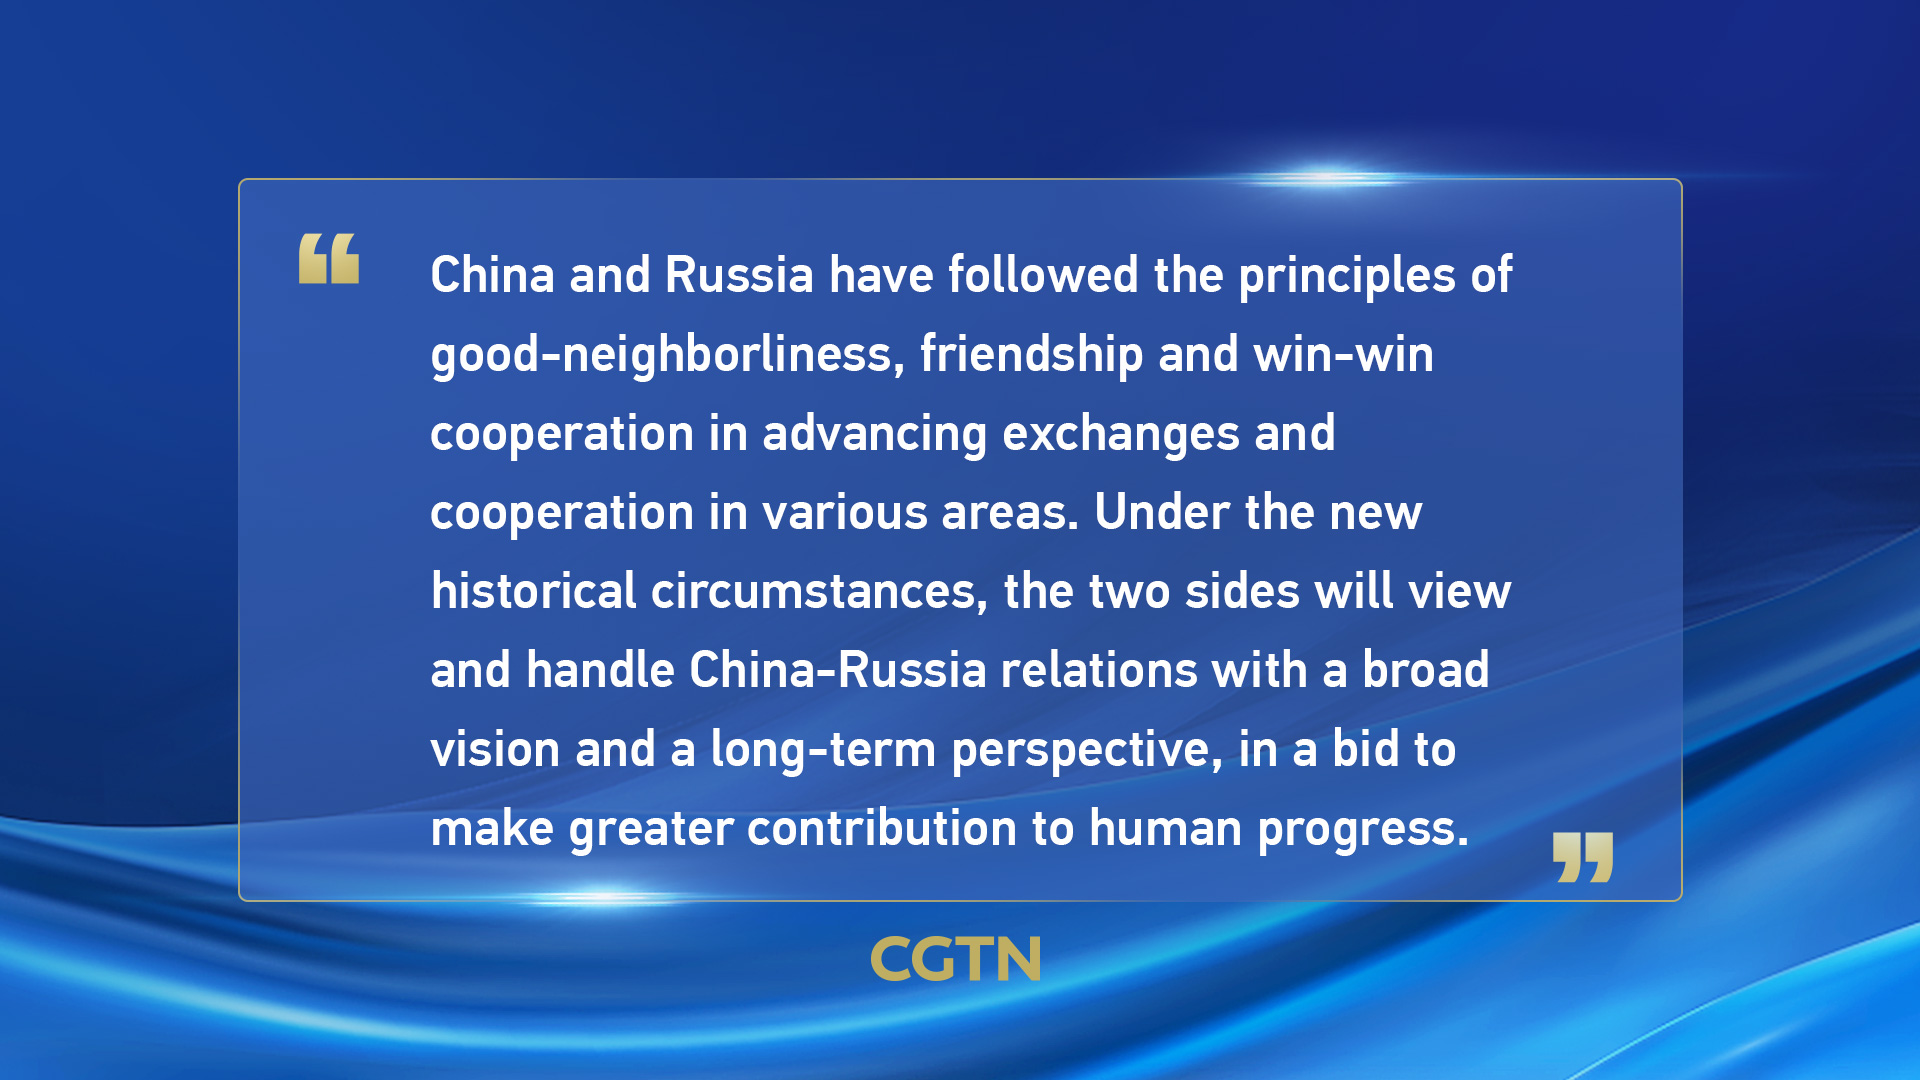 Xi Jinping's key quotes on China-Russia ties